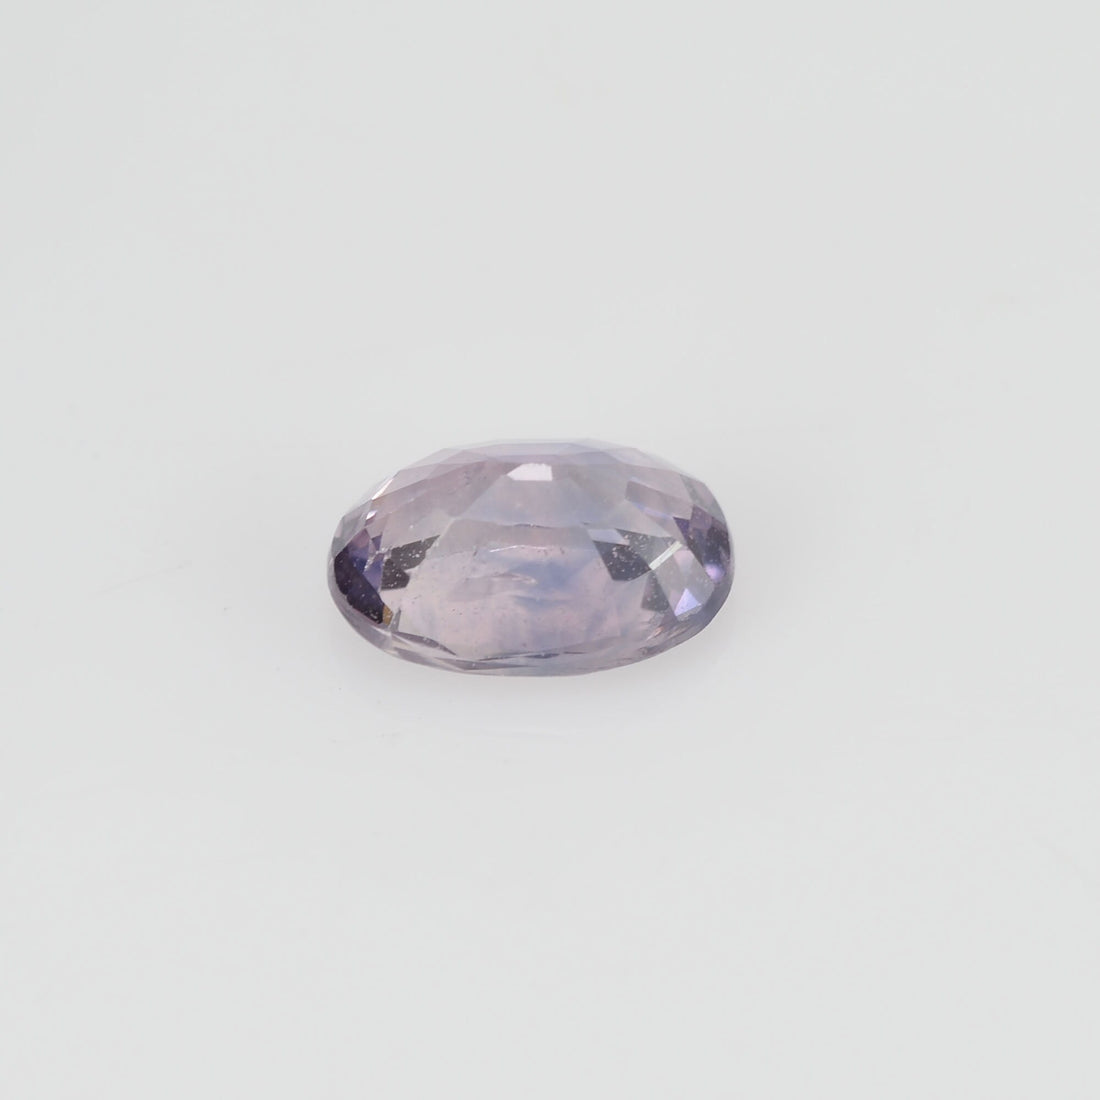 0.98 cts Natural Purple Sapphire Loose Gemstone Oval Cut